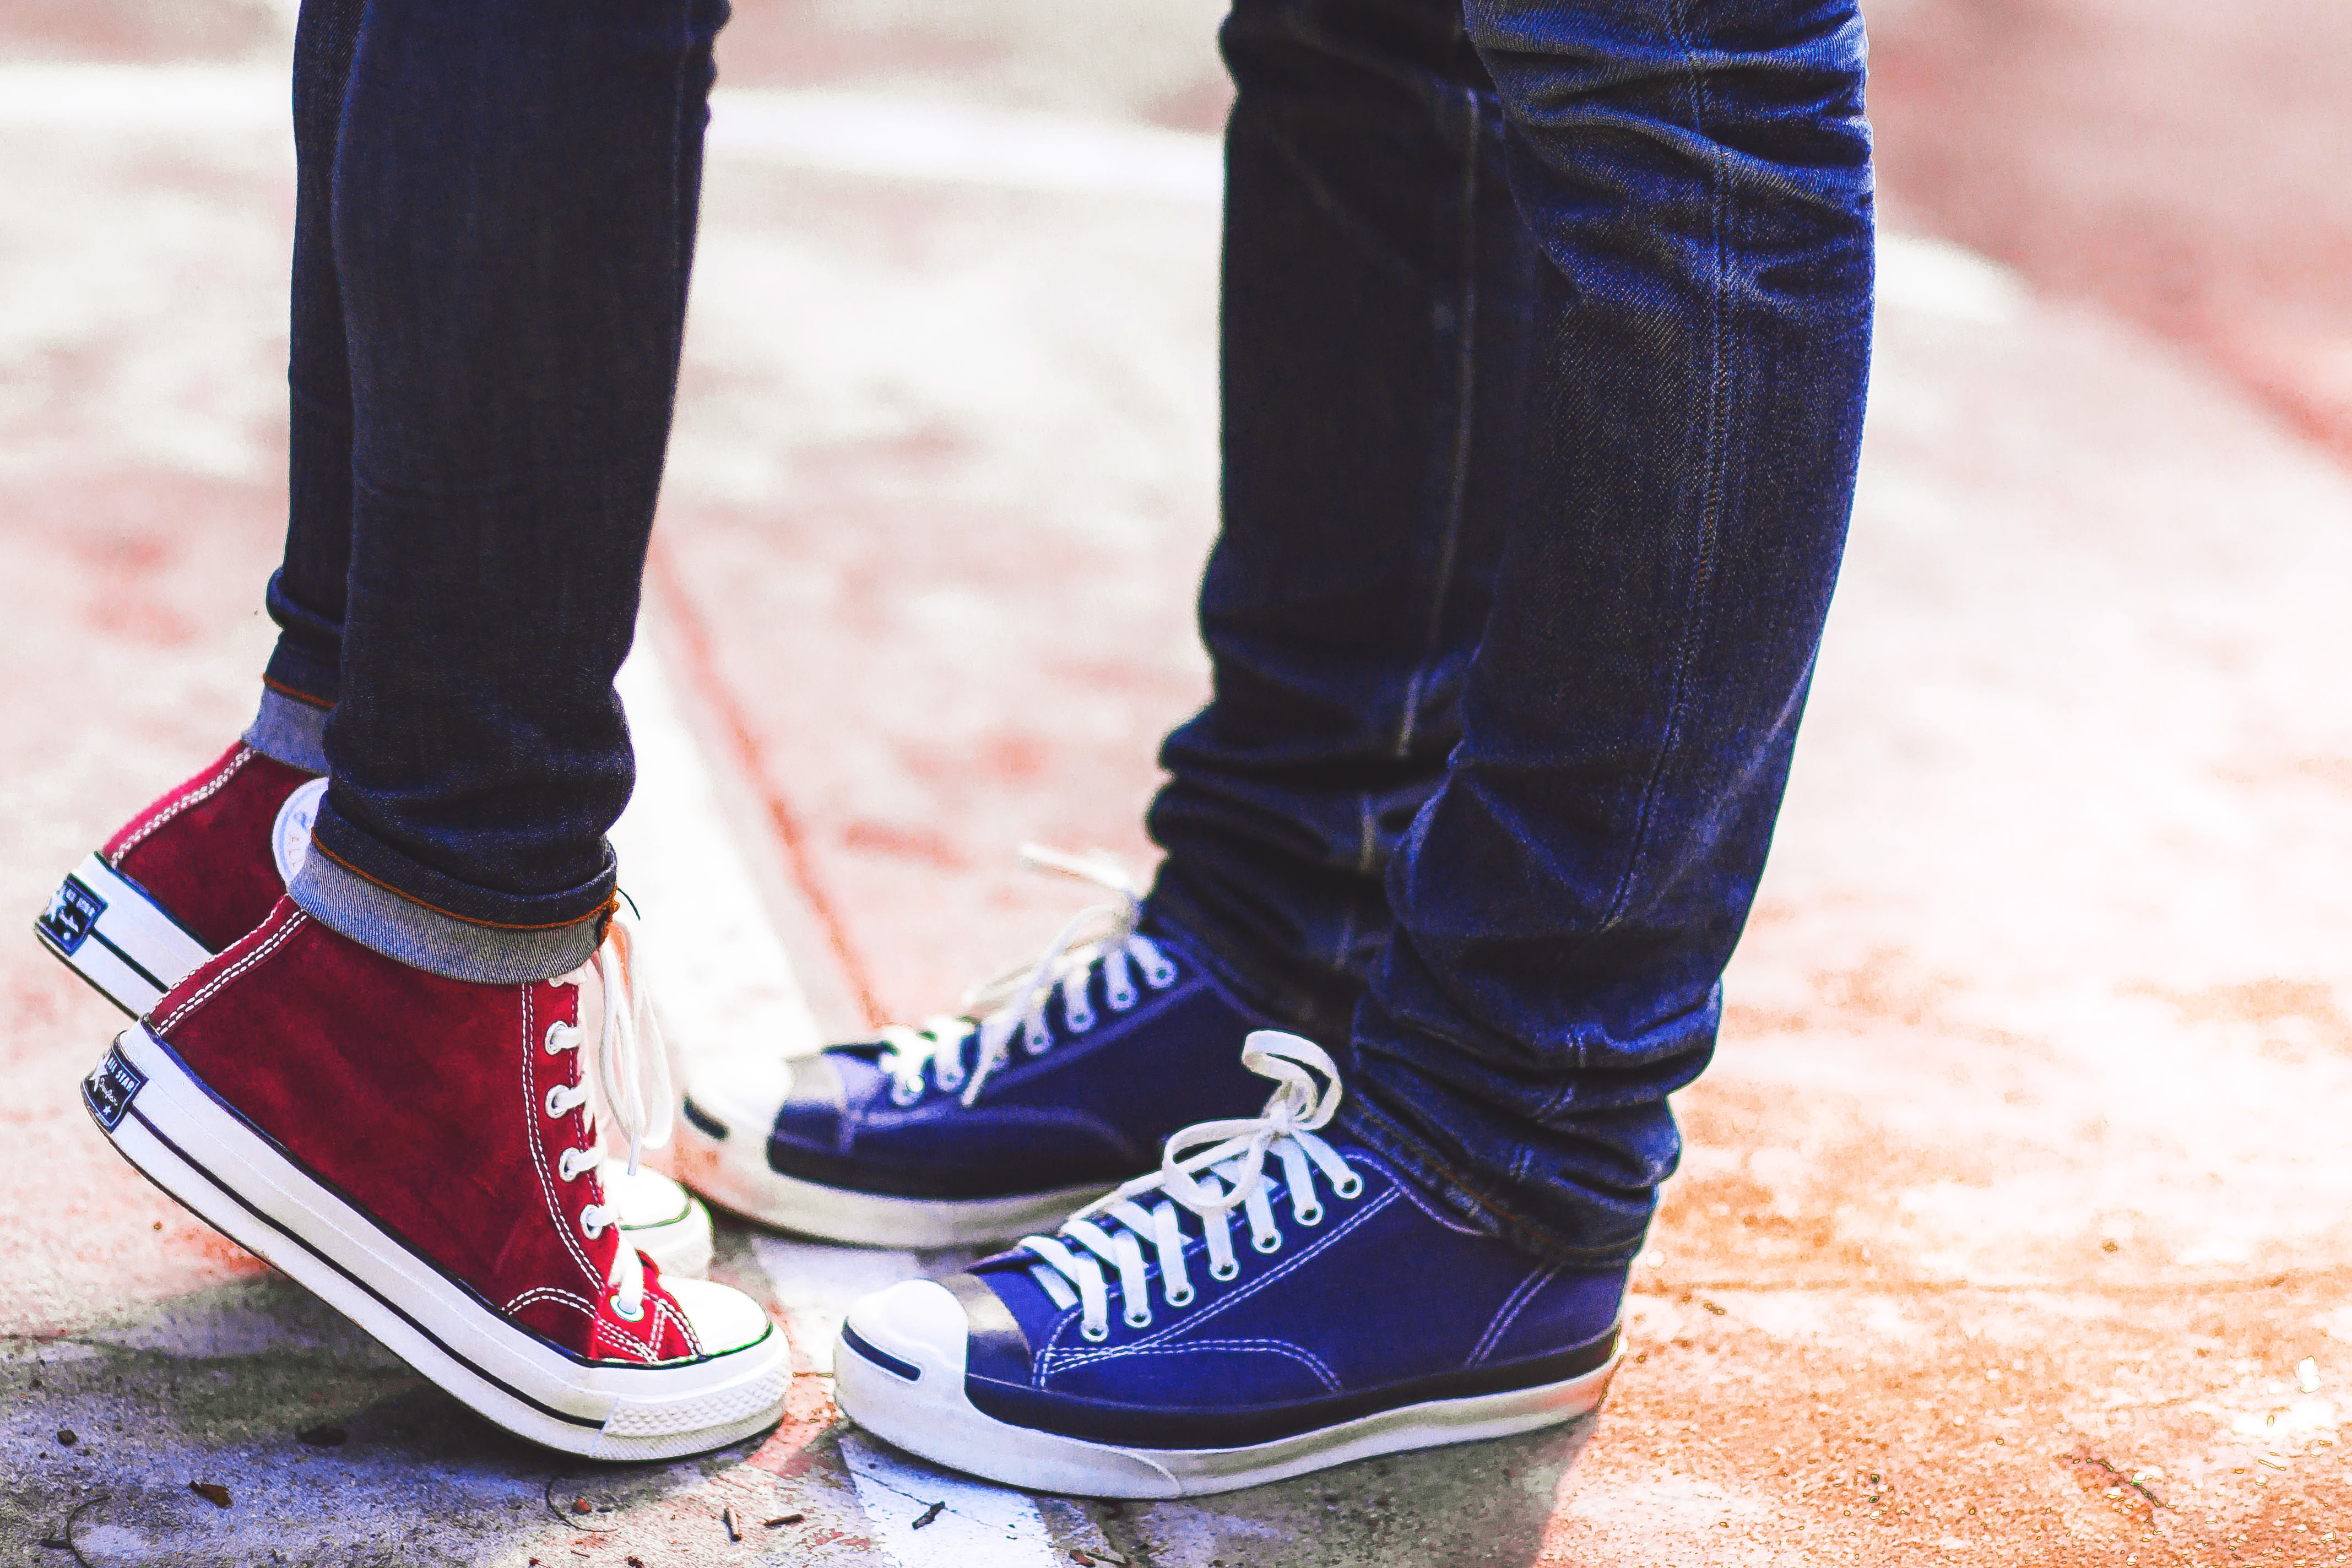 An image of two men, who are a couple and wearing matching Converse sneakers. One is on their toes as if stretching for a kiss. The image represents the importance of connection and support in LGBTQ relationships. The image promotes the idea of seeking LGBTQ therapy in Hamden, CT, where individuals and couples can work together to overcome challenges, build stronger relationships, and find support. The image evokes a sense of intimacy and the idea that with support and guidance, LGBTQ individuals can find the resources they need to live happier and healthier lives.